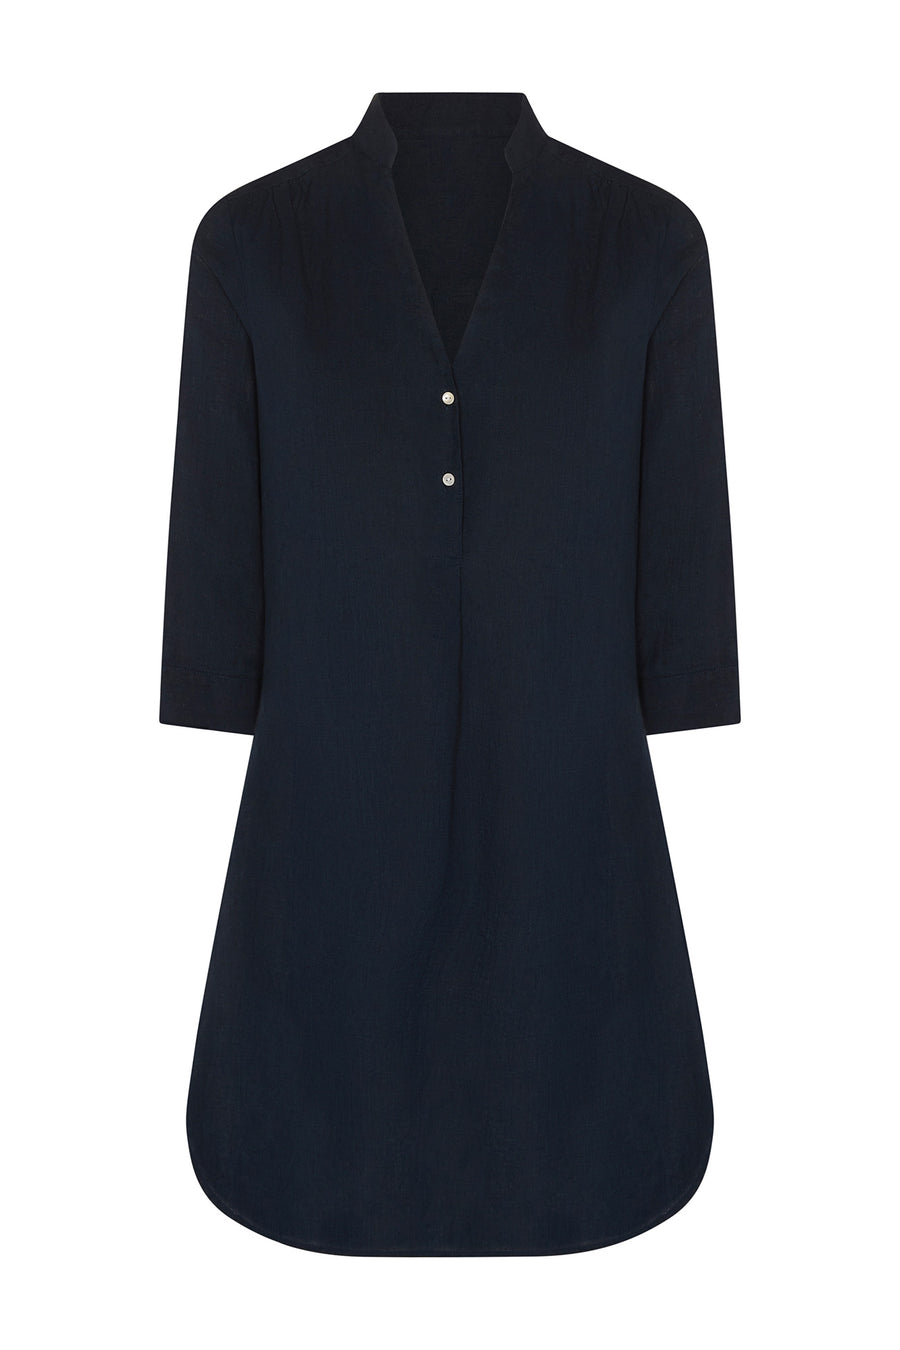 Womens holiday style linen dress in eclipse navy blue